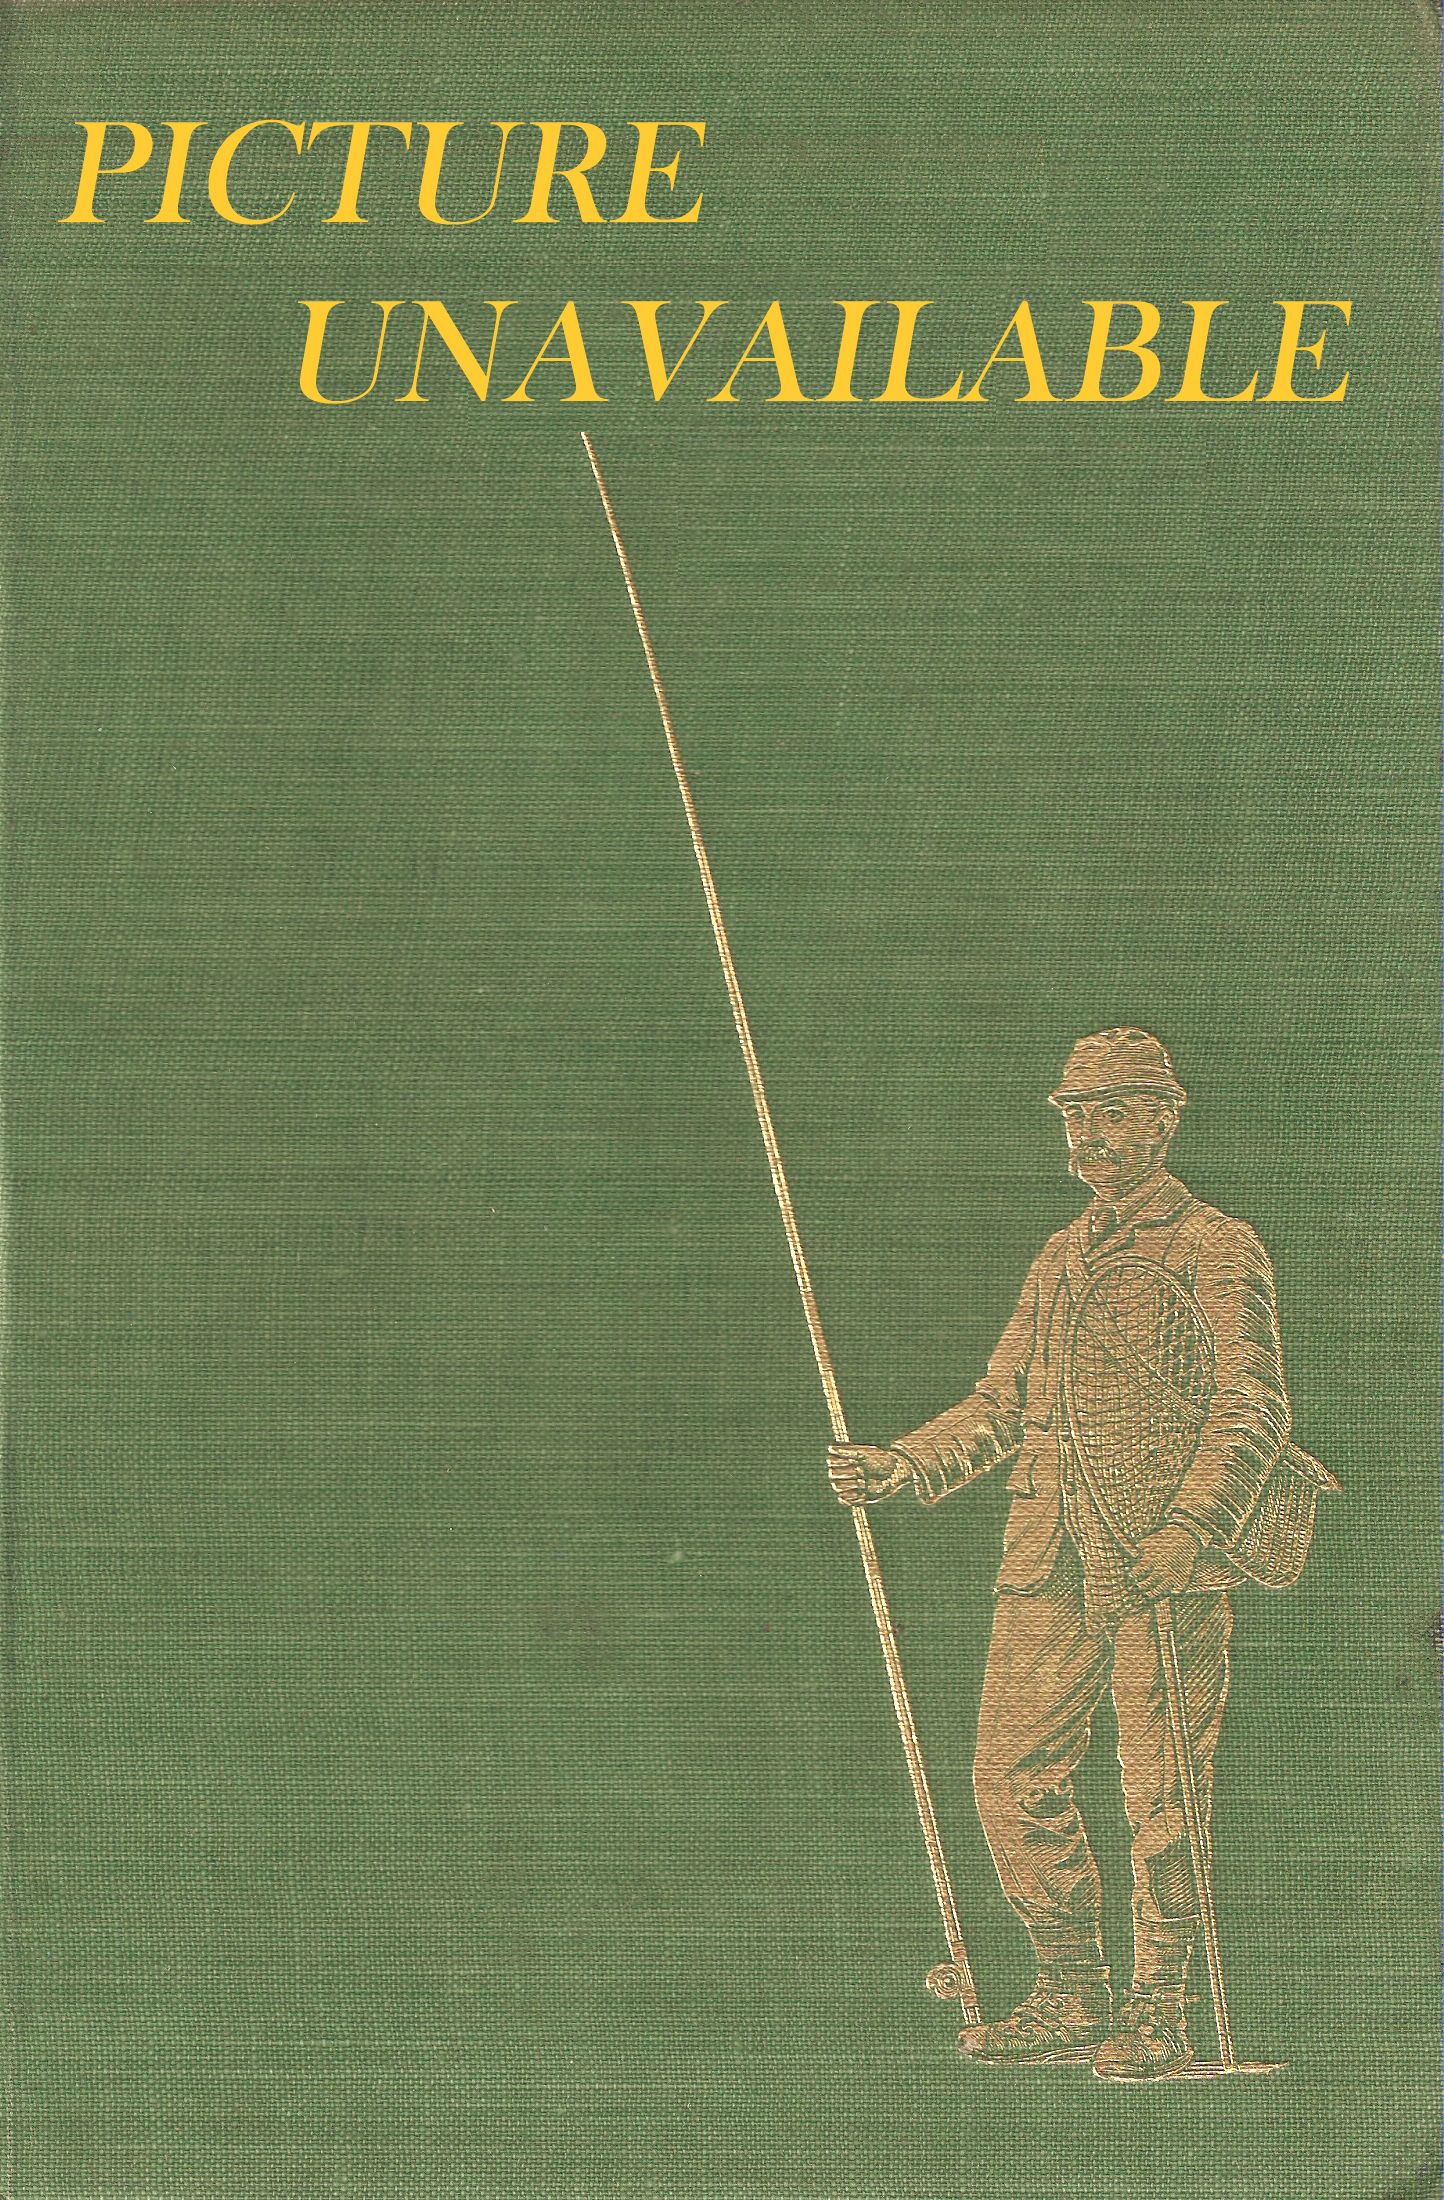 CATSKILL RIVERS: BIRTHPLACE OF AMERICAN FLY FISHING. By Austin M. Francis.